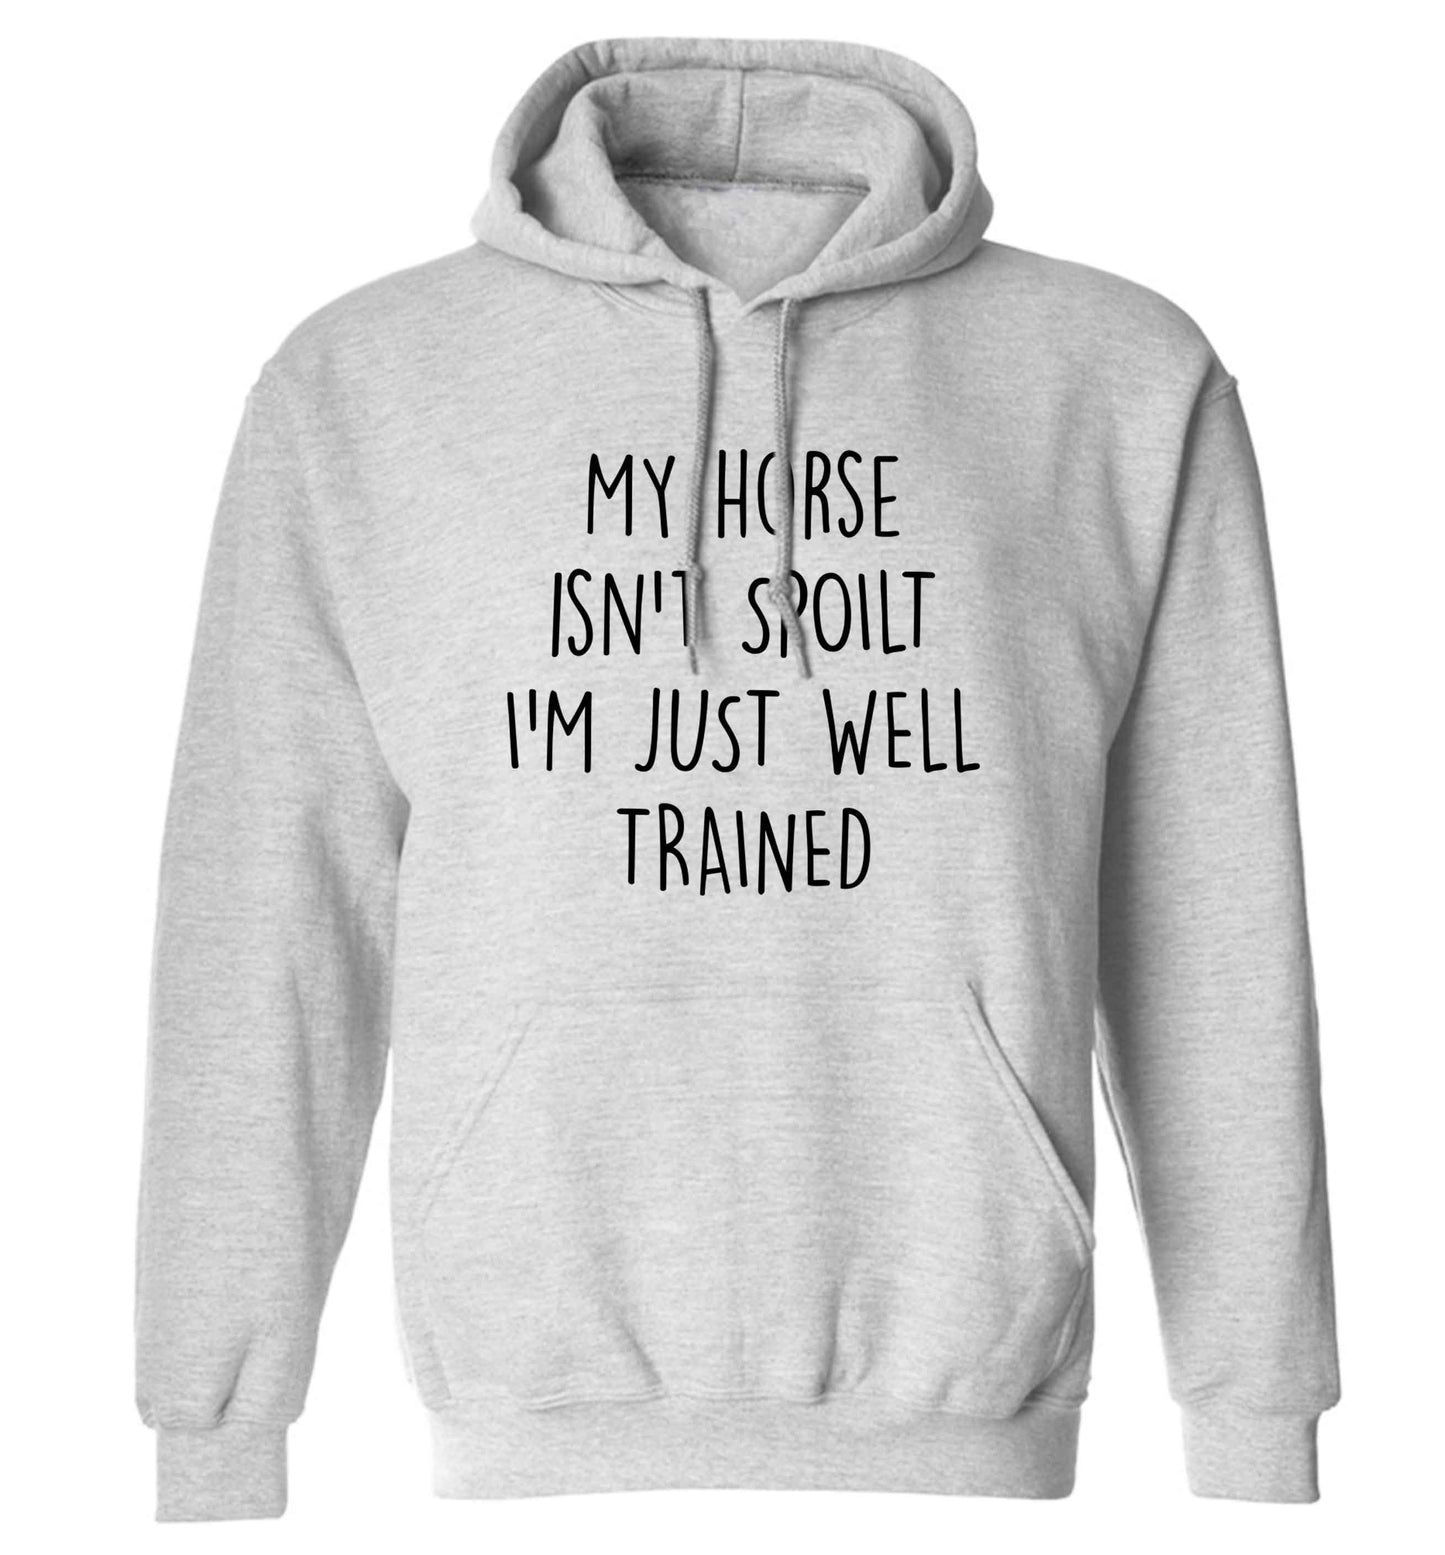 My horse isn't spoilt I'm just well trained adults unisex grey hoodie 2XL